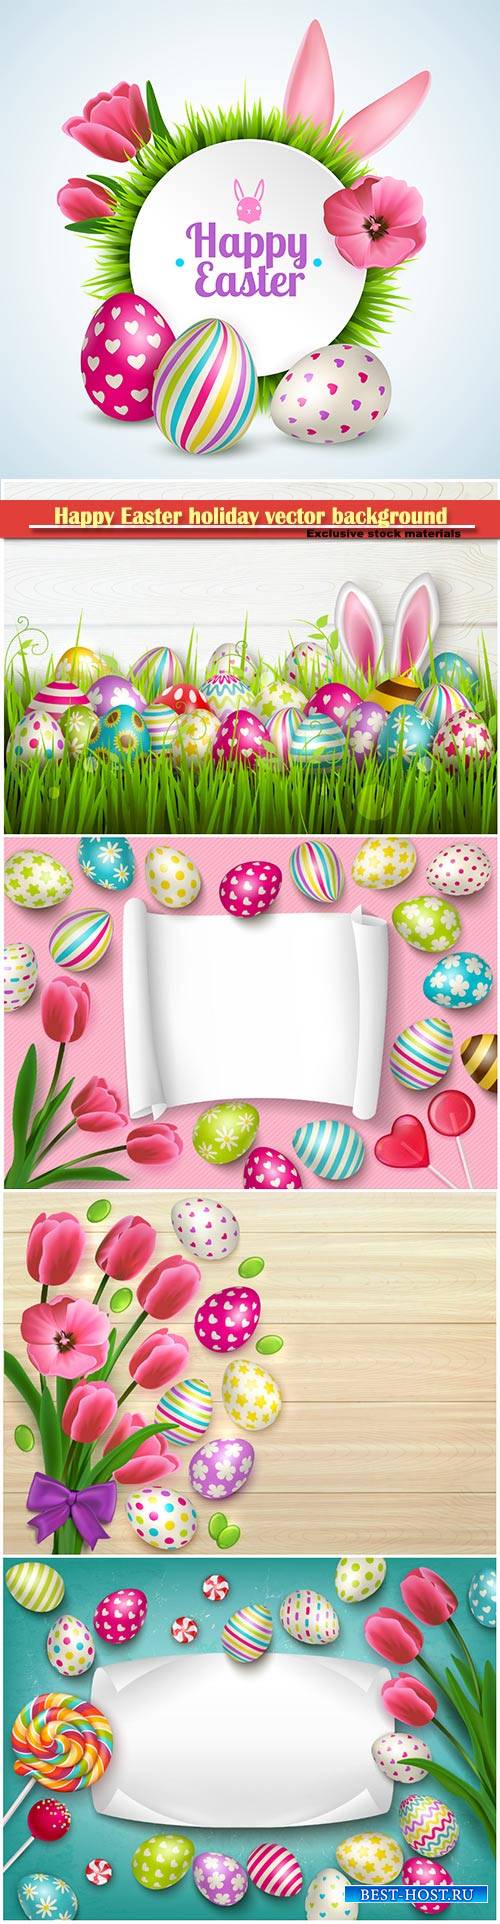 Happy easter composition with eggs rabbit ears and spring flowers vector il ...